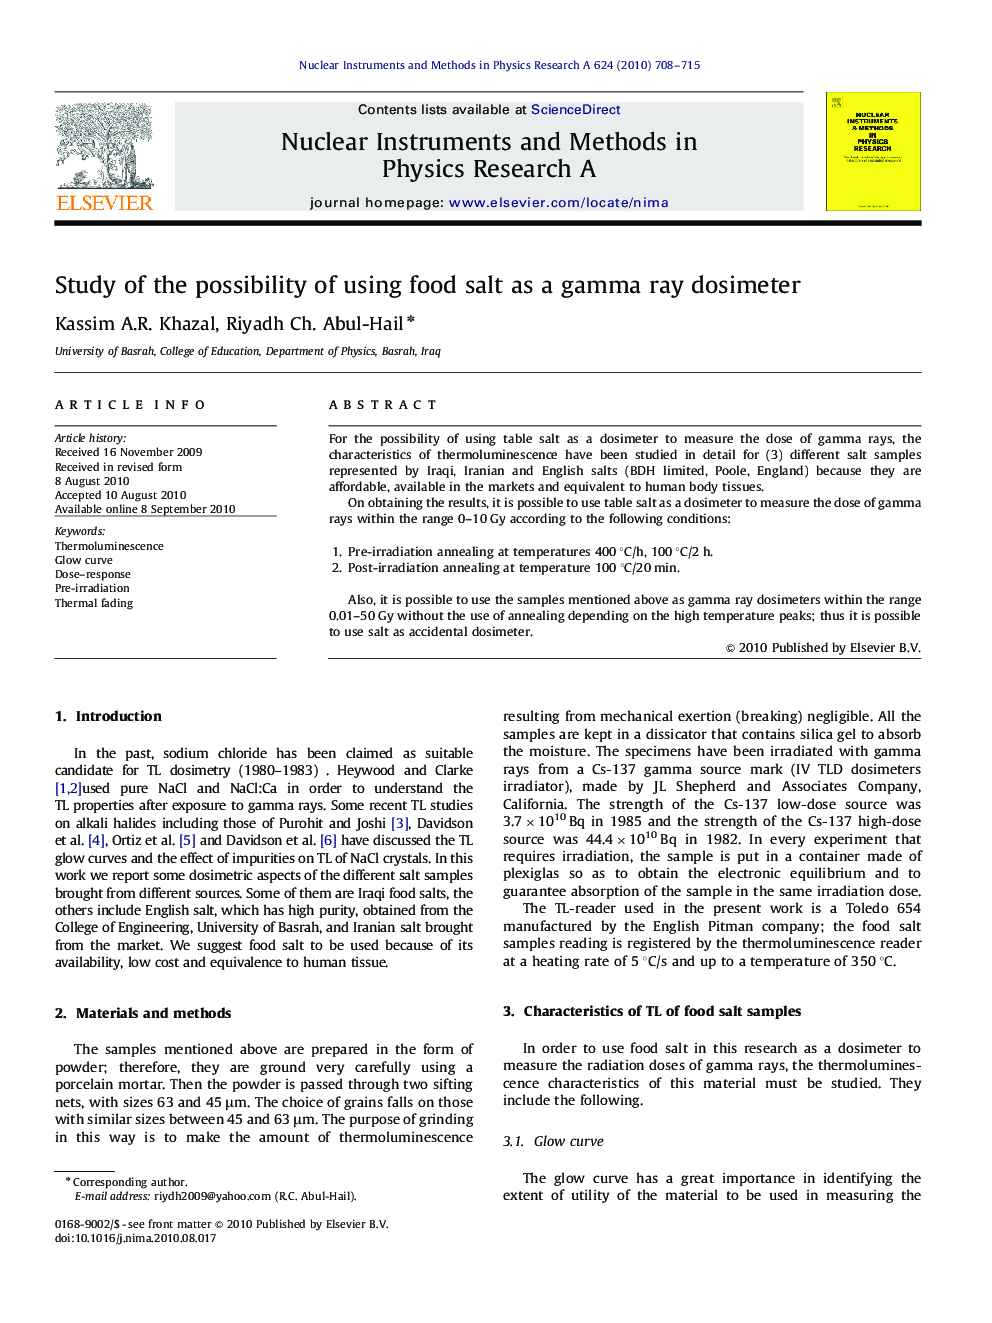 Study of the possibility of using food salt as a gamma ray dosimeter